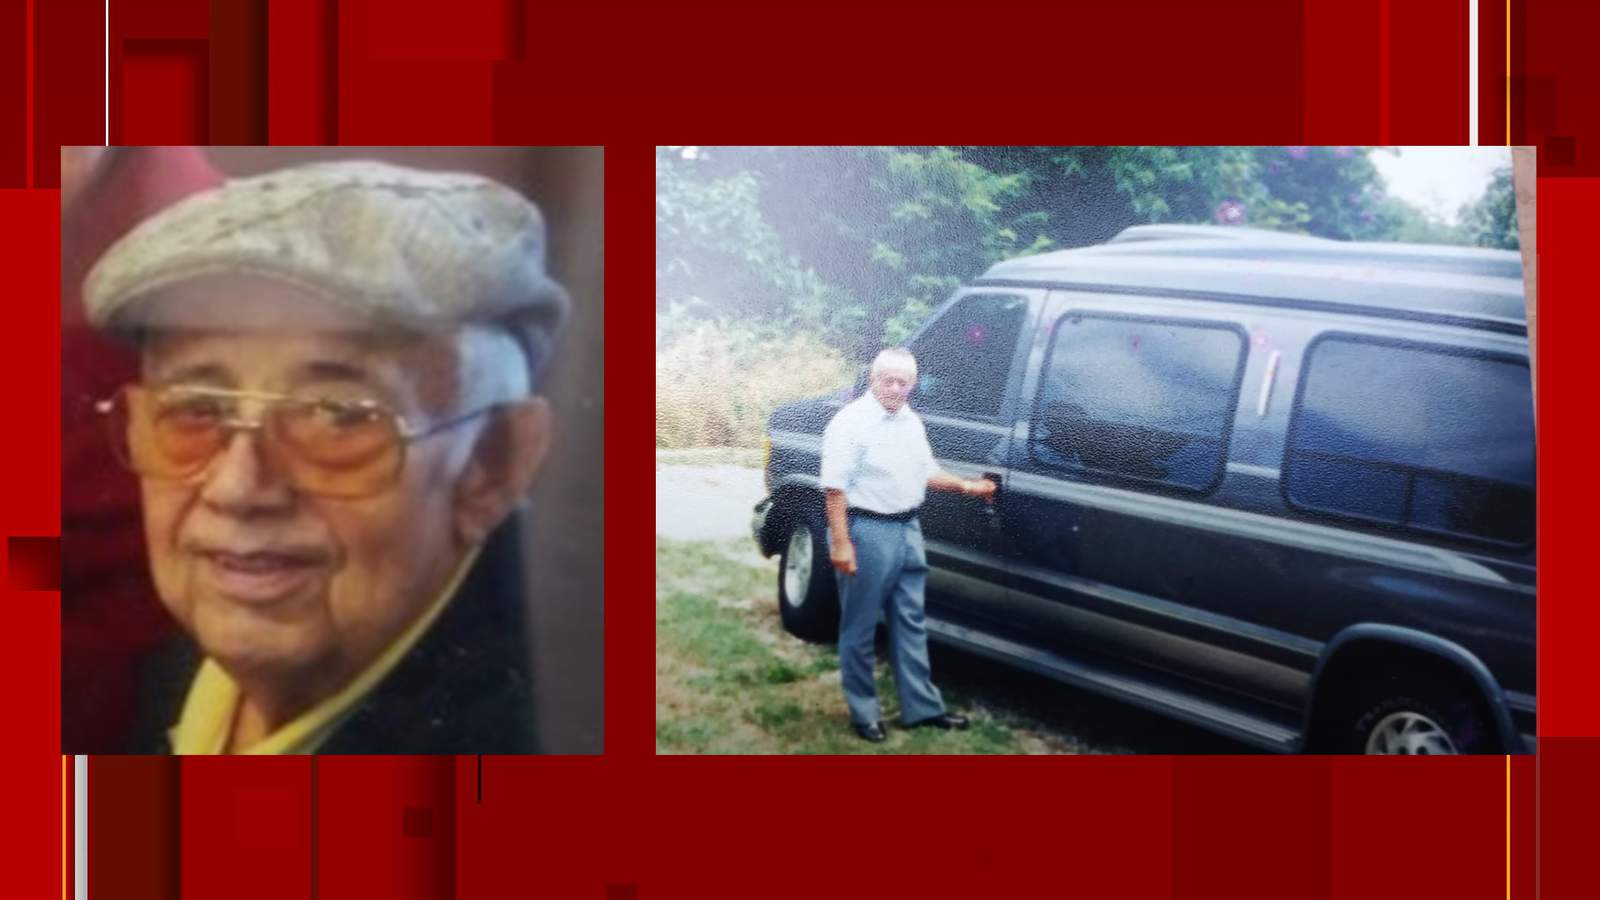 84-year-old Amherst man with possible cognitive issues missing